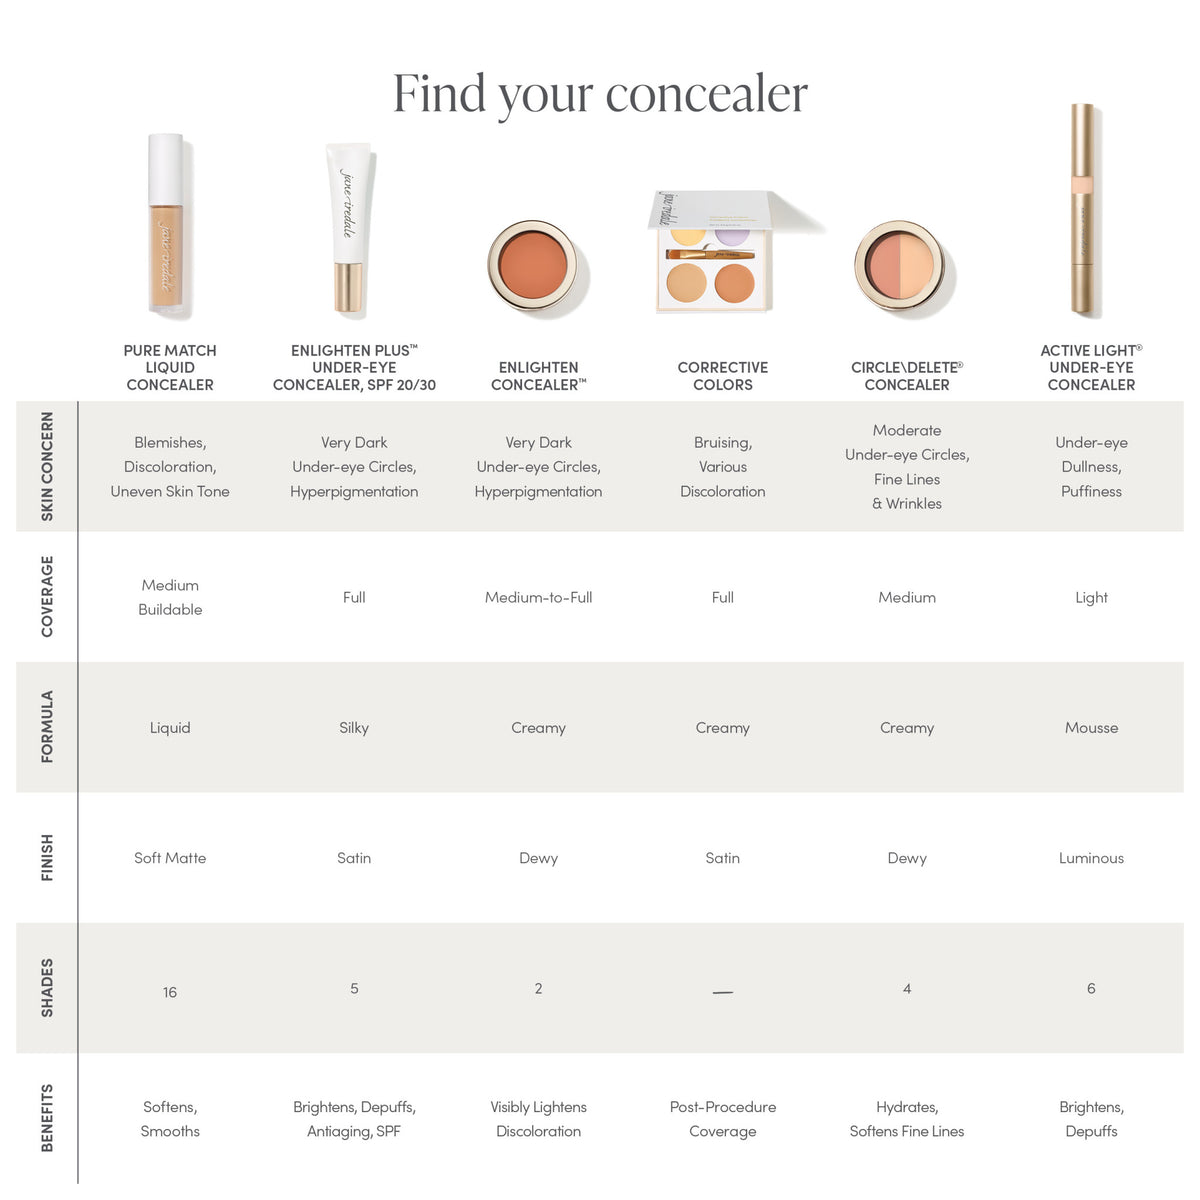 Jane Iredale PureMatch Liquid Concealer . This product is in the color brown